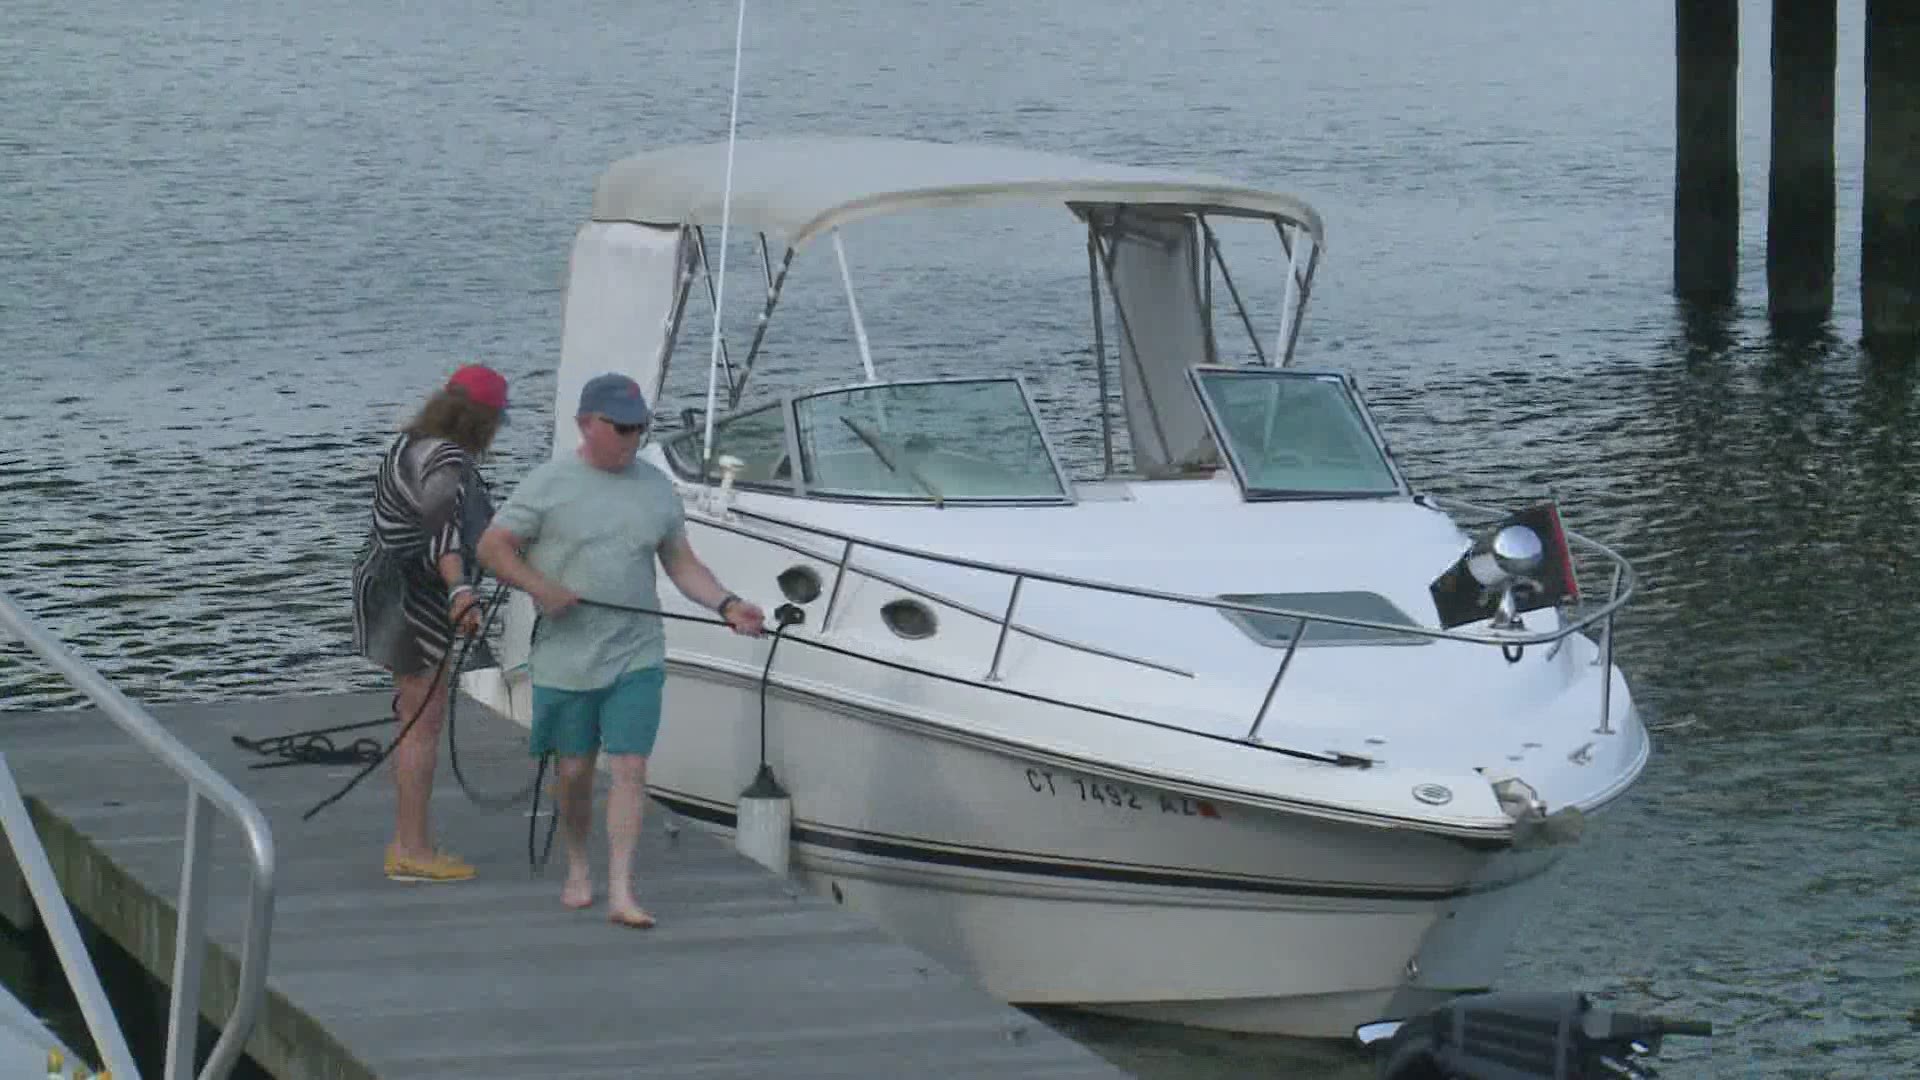 More people want their boating licenses due to the constraints of the cornonavirus